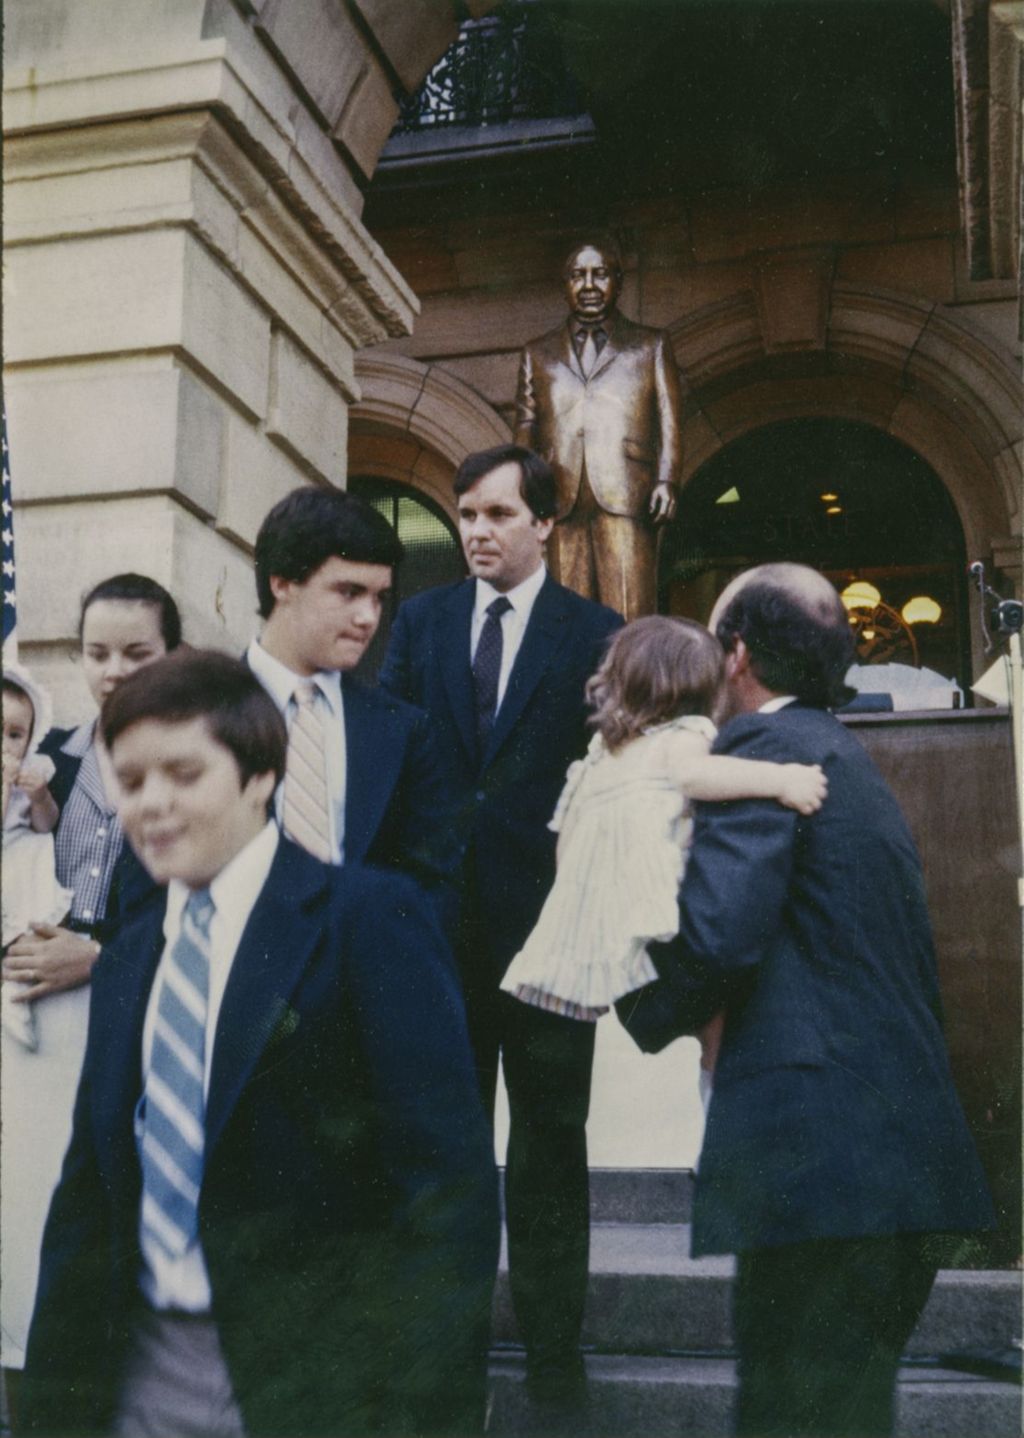 Miniature of Daley family members near the Richard J. Daley statue